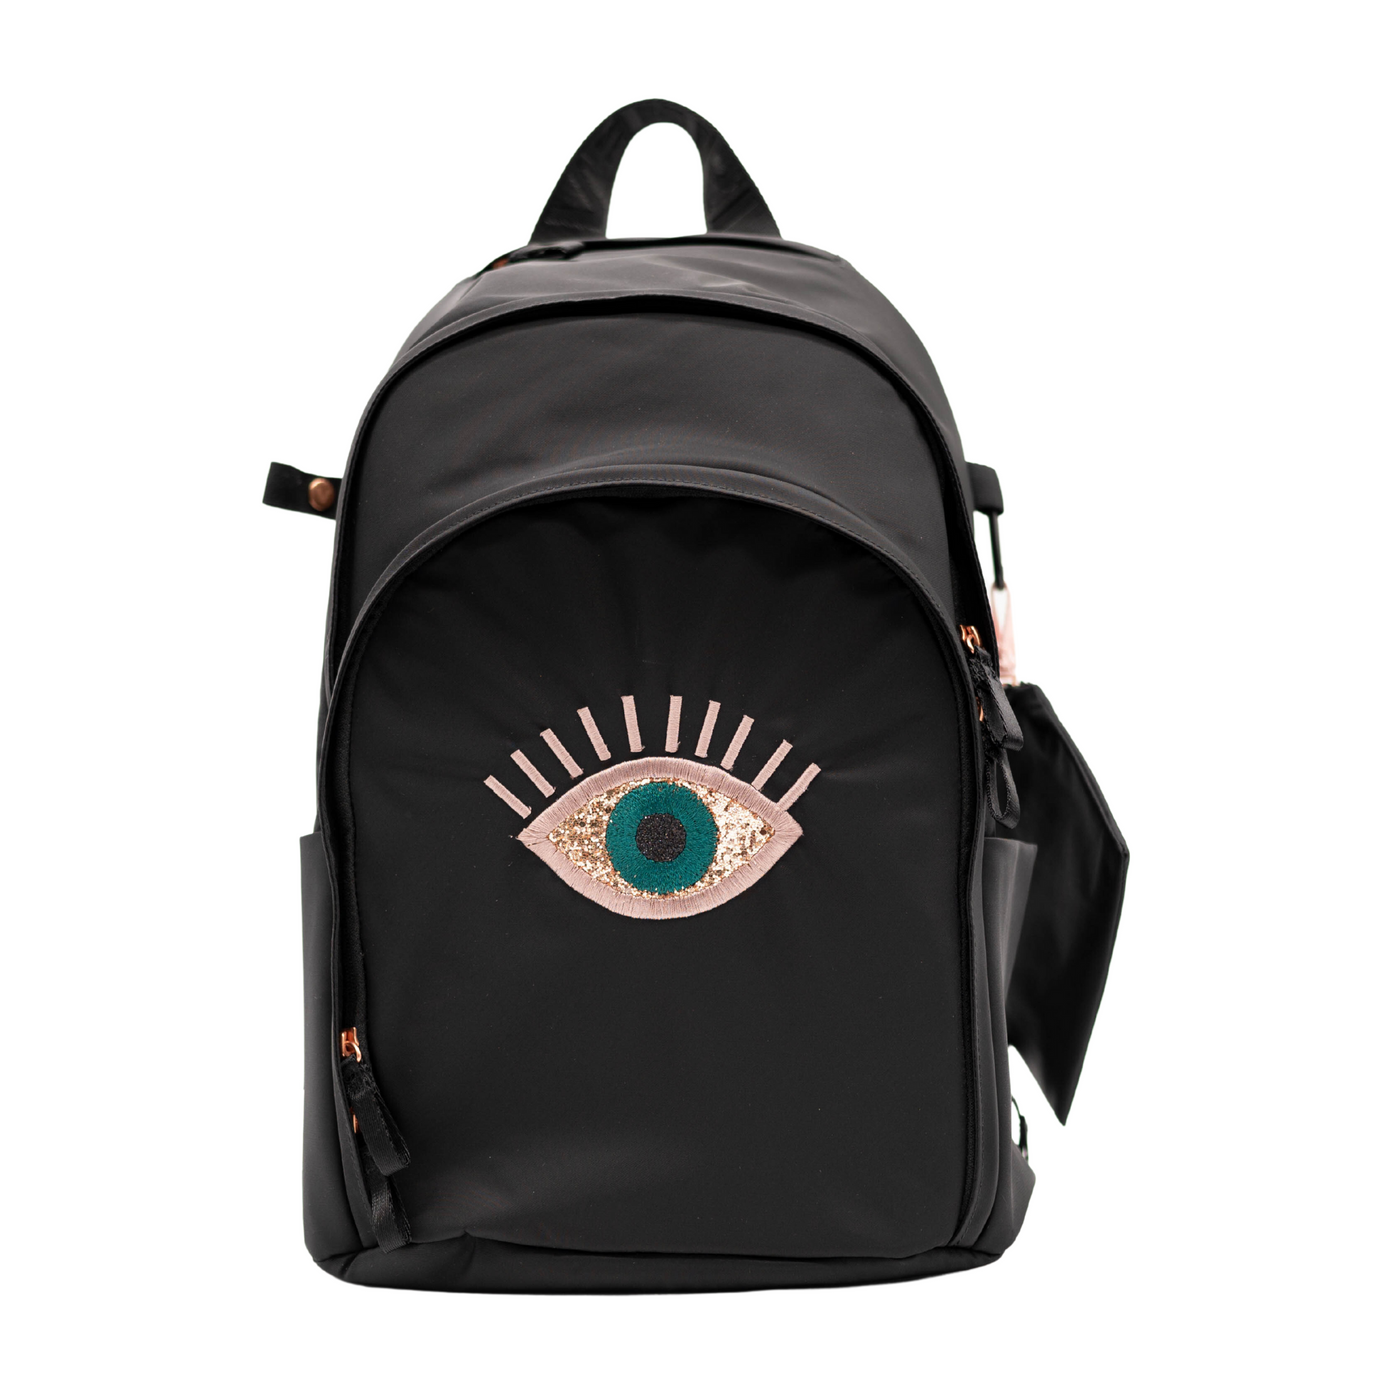 Novelty Delaire Backpack - “Evil Eye” (custom embroidered - allow an additional 5 business days to ship)